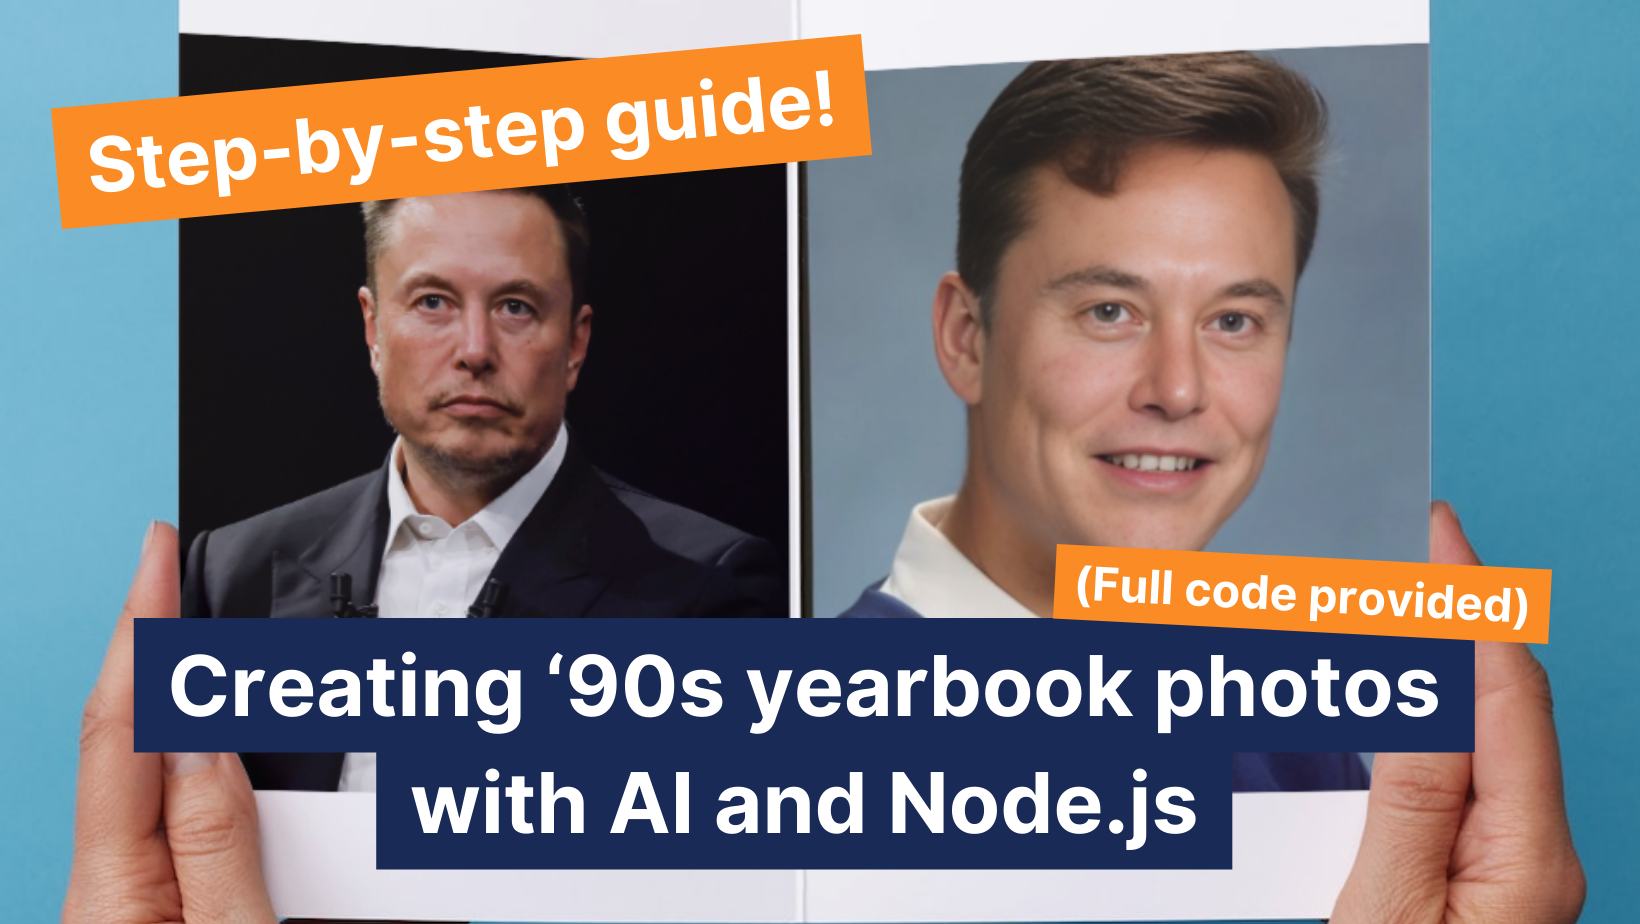 Build Your Own Epik-inspired App: Transform Selfies into '90s Yearbook Photos with Node.js and AI